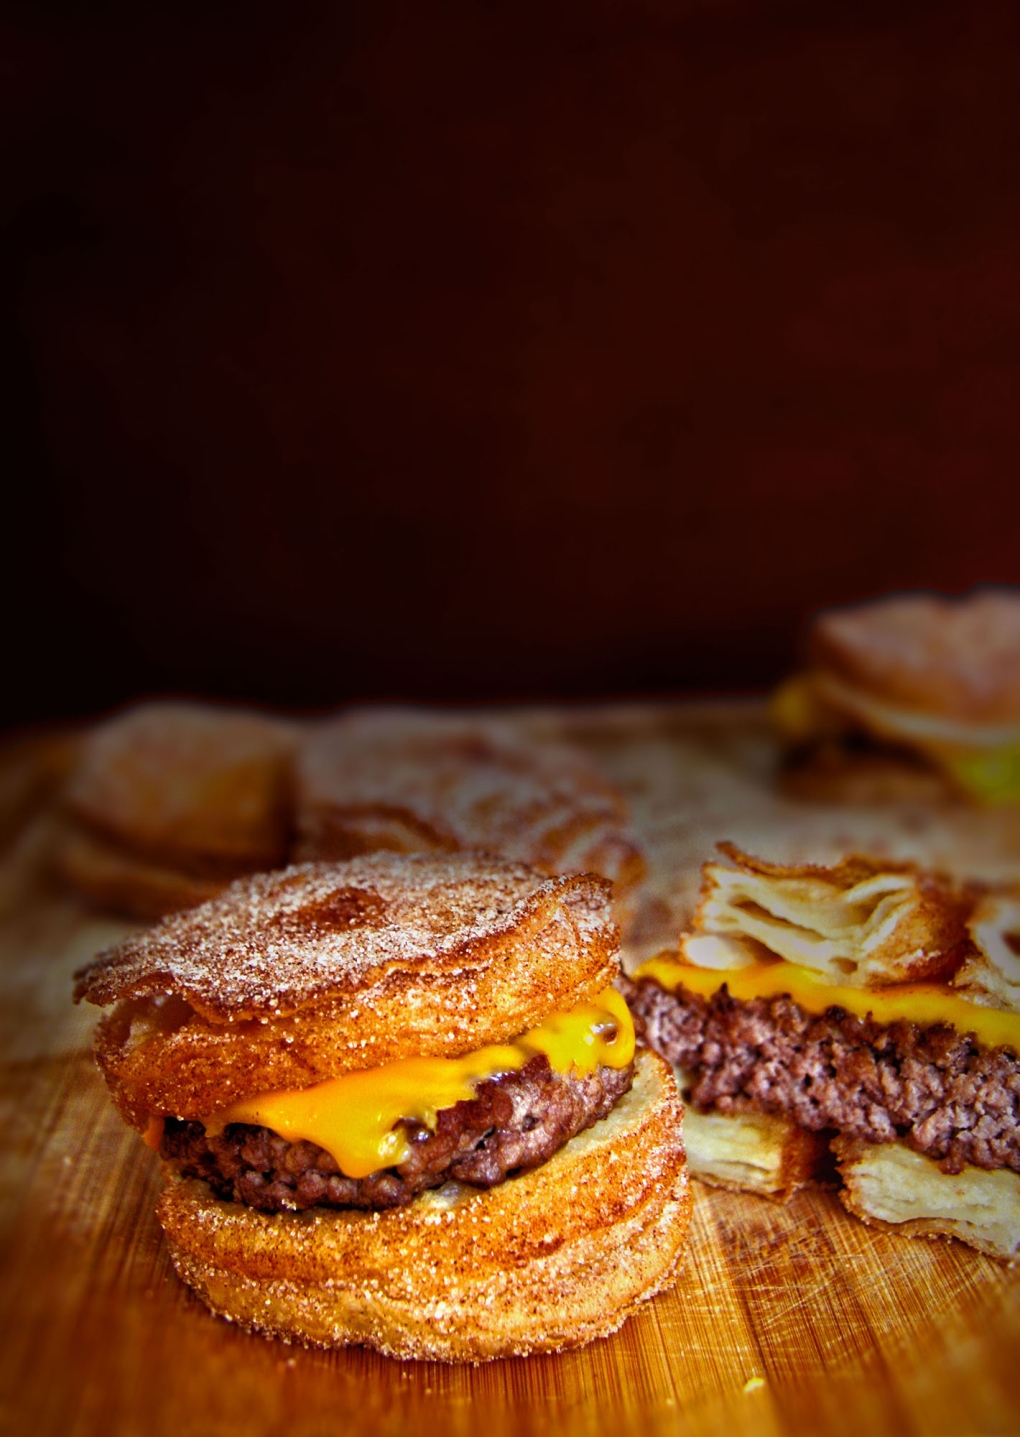 Cronut burger coming to CNE